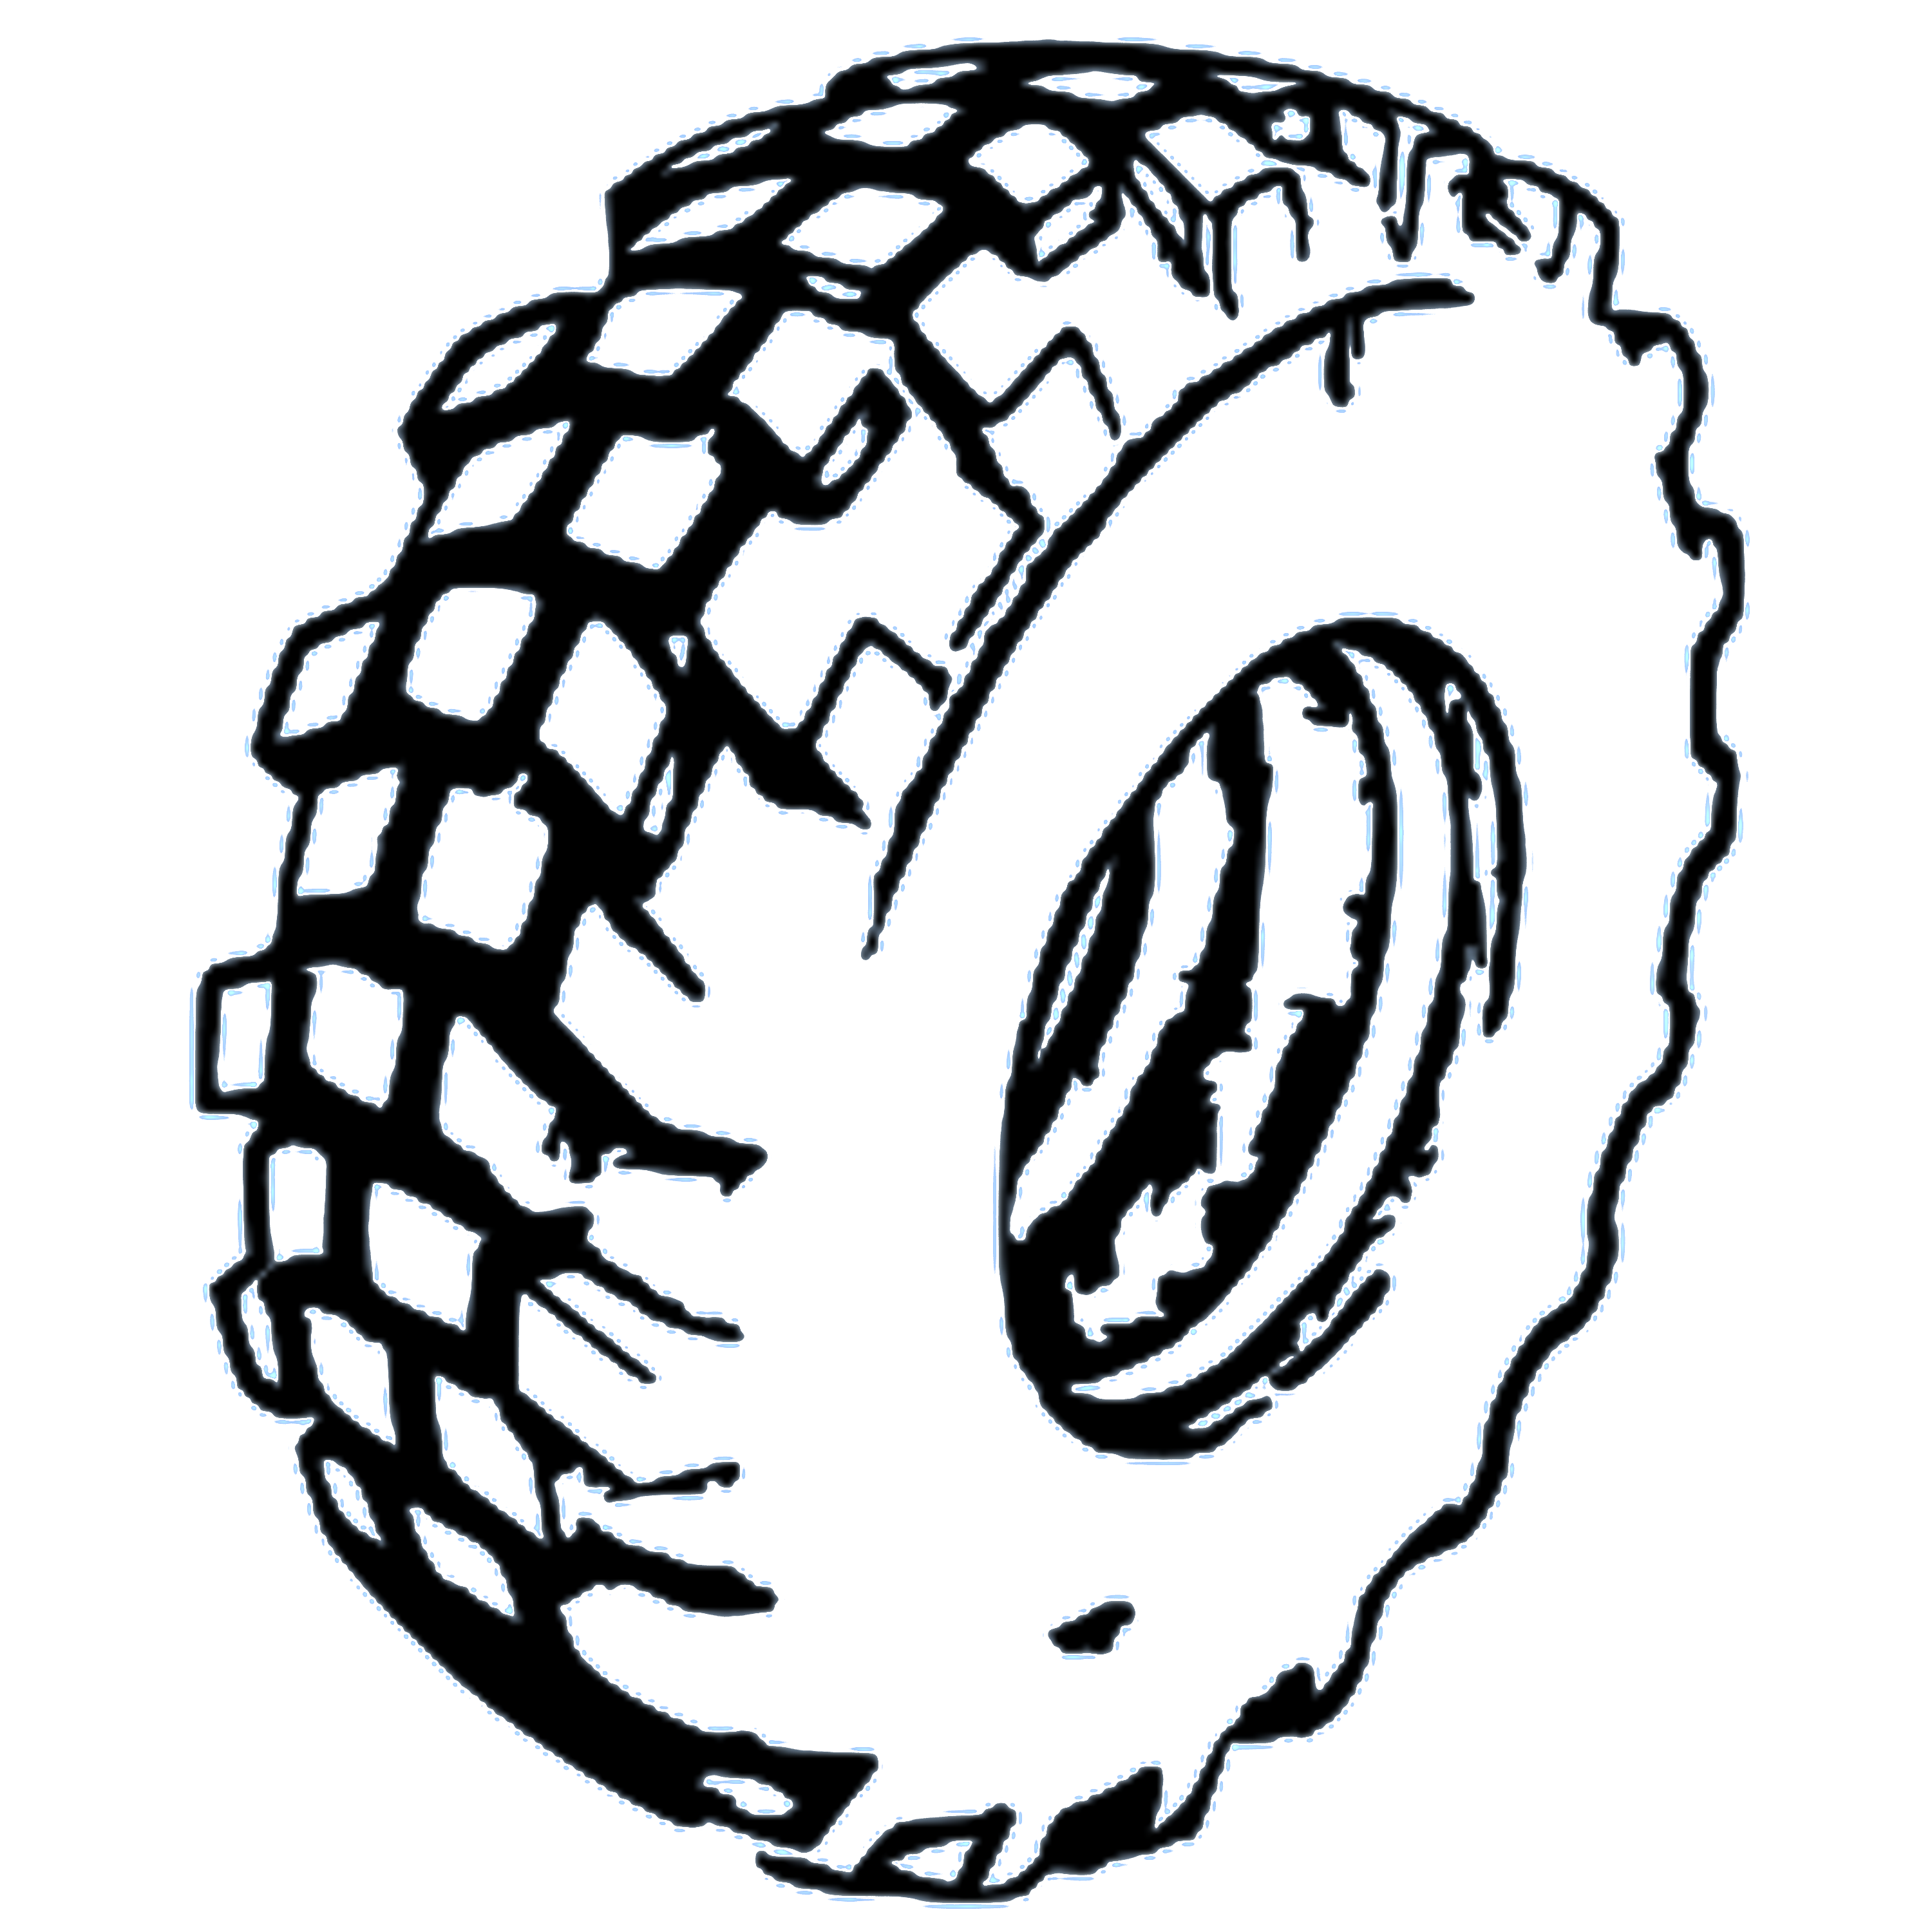 wheels clipart black and white